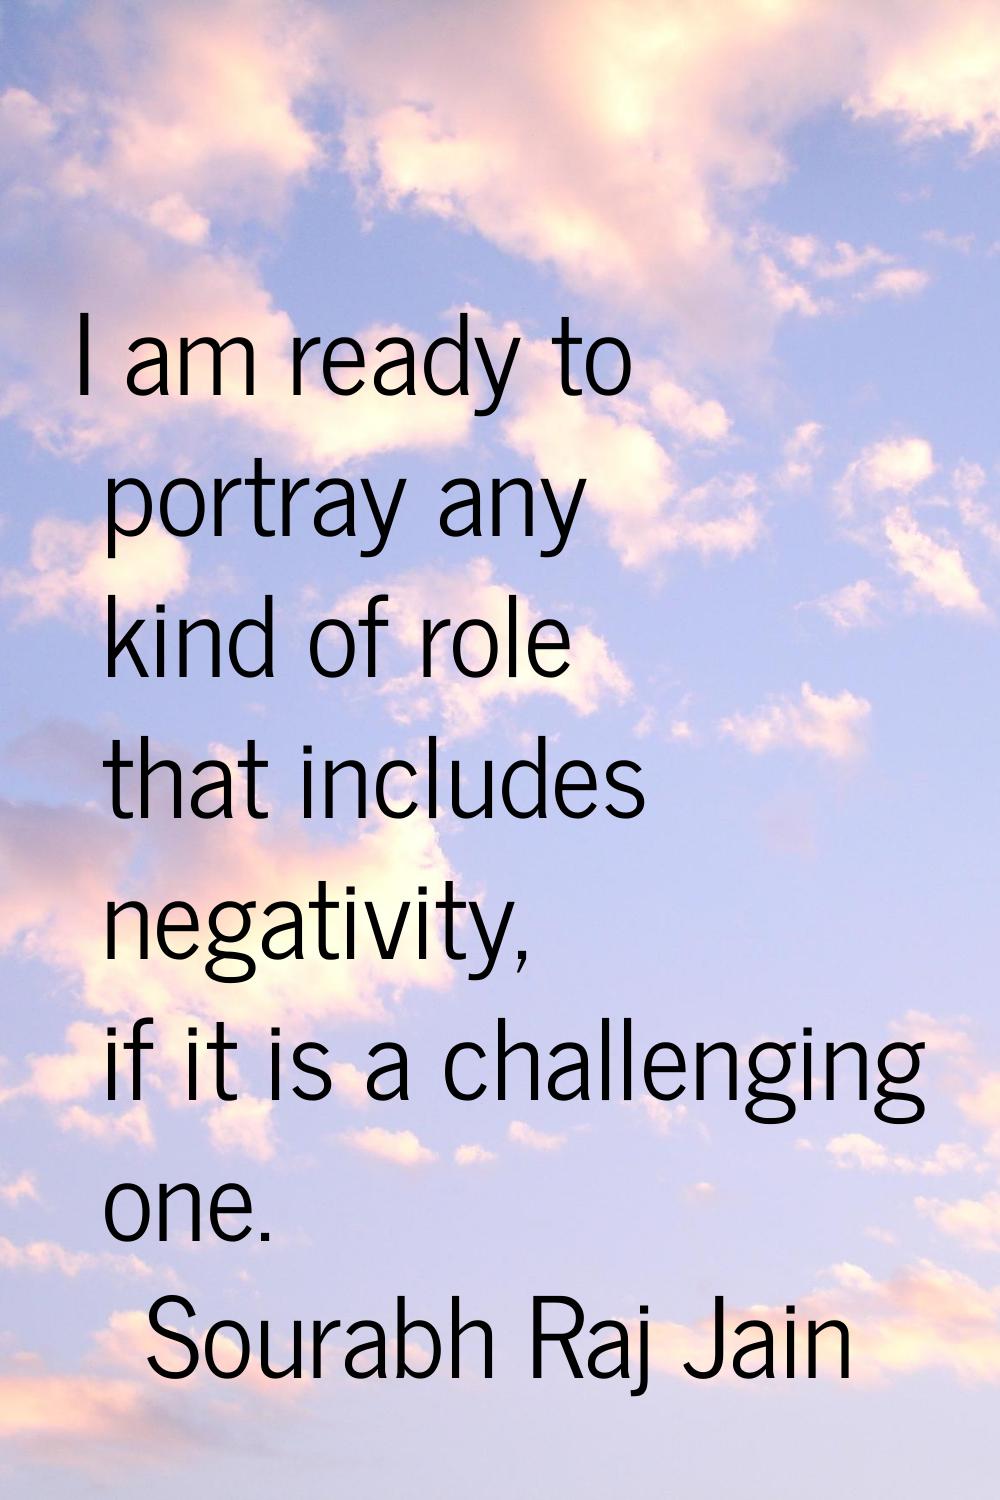 I am ready to portray any kind of role that includes negativity, if it is a challenging one.